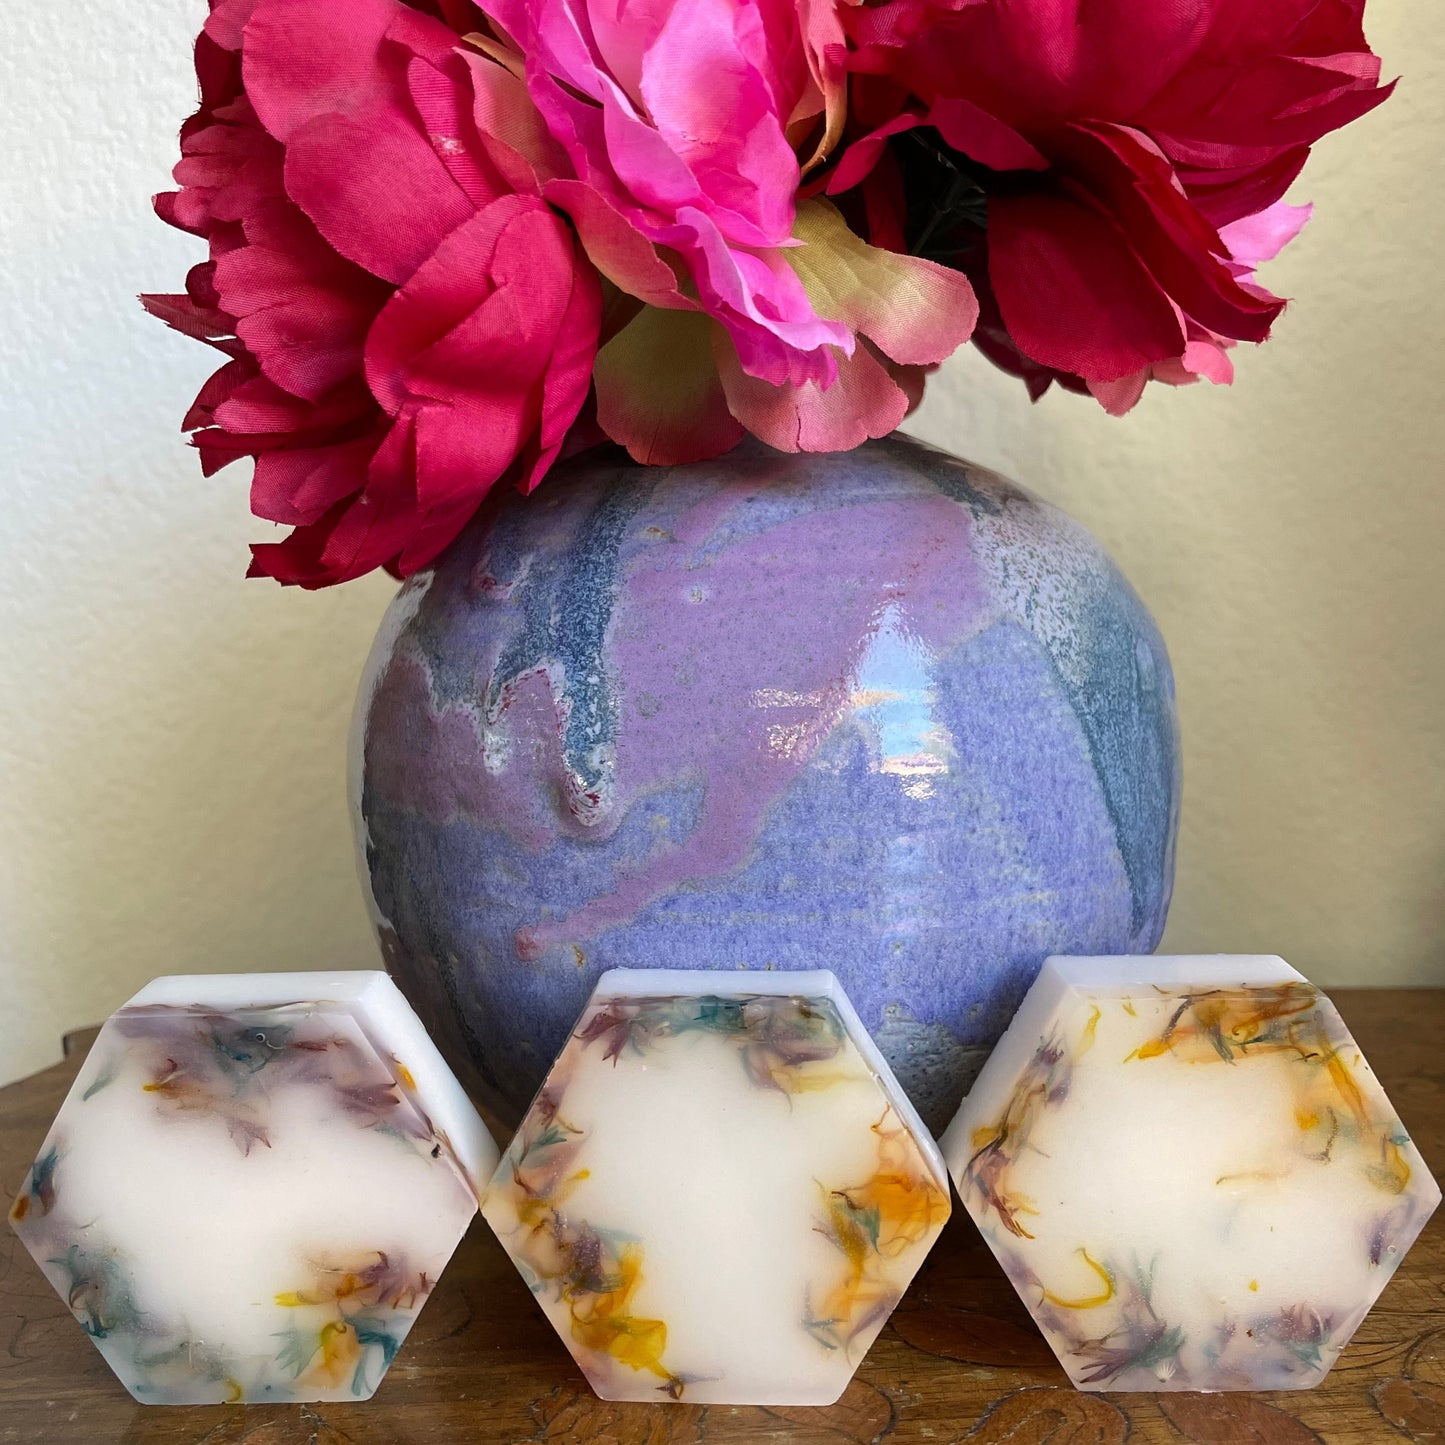 https://handmadeonmarviasquare.com/products/patrices-angel-healing-soap  Beautiful wildflower scented essential oil, hexagon shaped soap. Blended with Shea butter, coconut oil, marigold petals, blue and pink cornflower petals that will indulge your skin in pure and natural moisture.